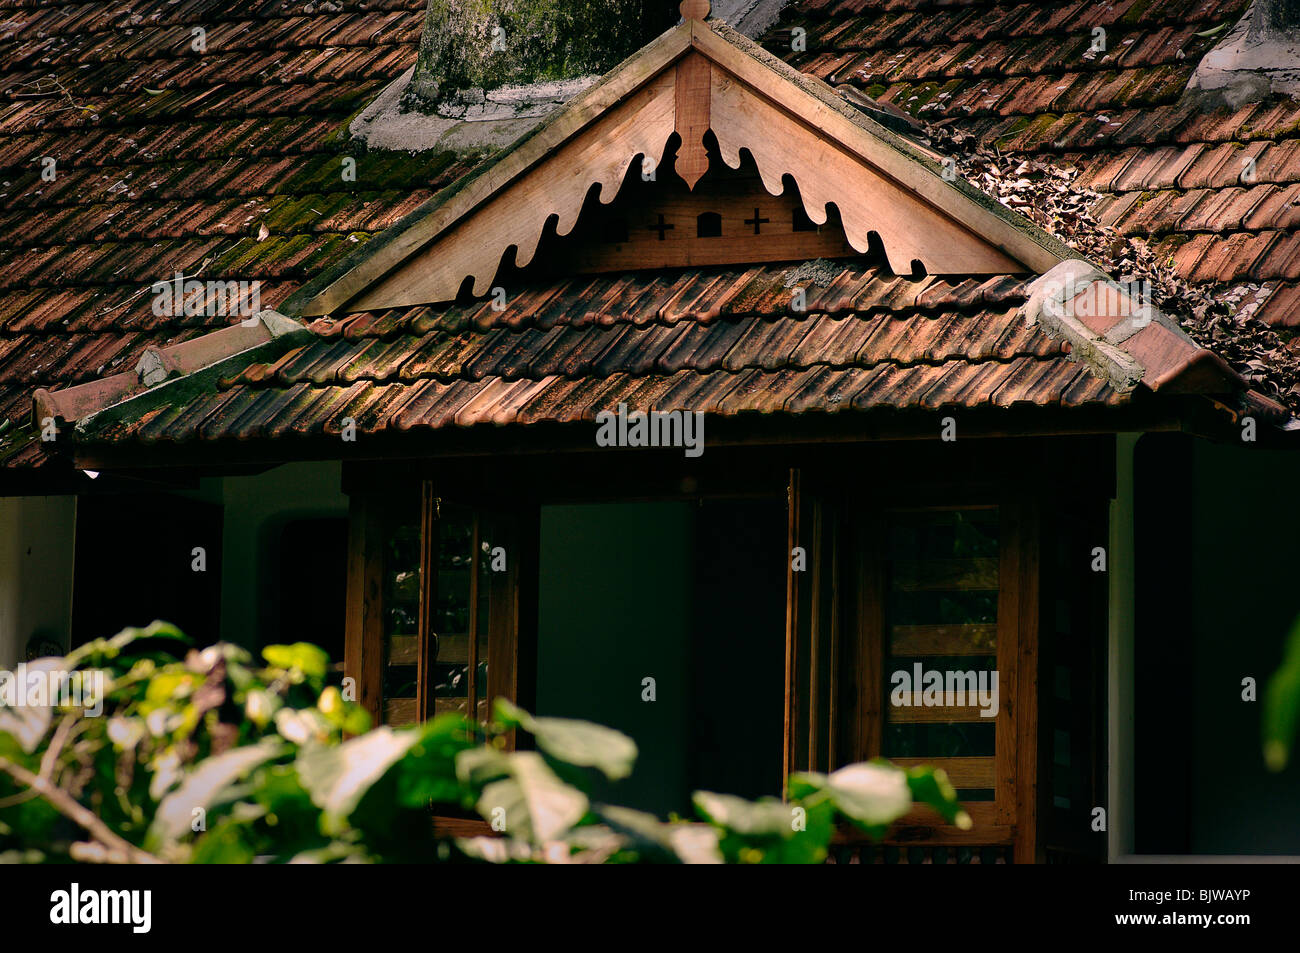 slanted roof of a cootage built in kerala style architecture Stock Photo